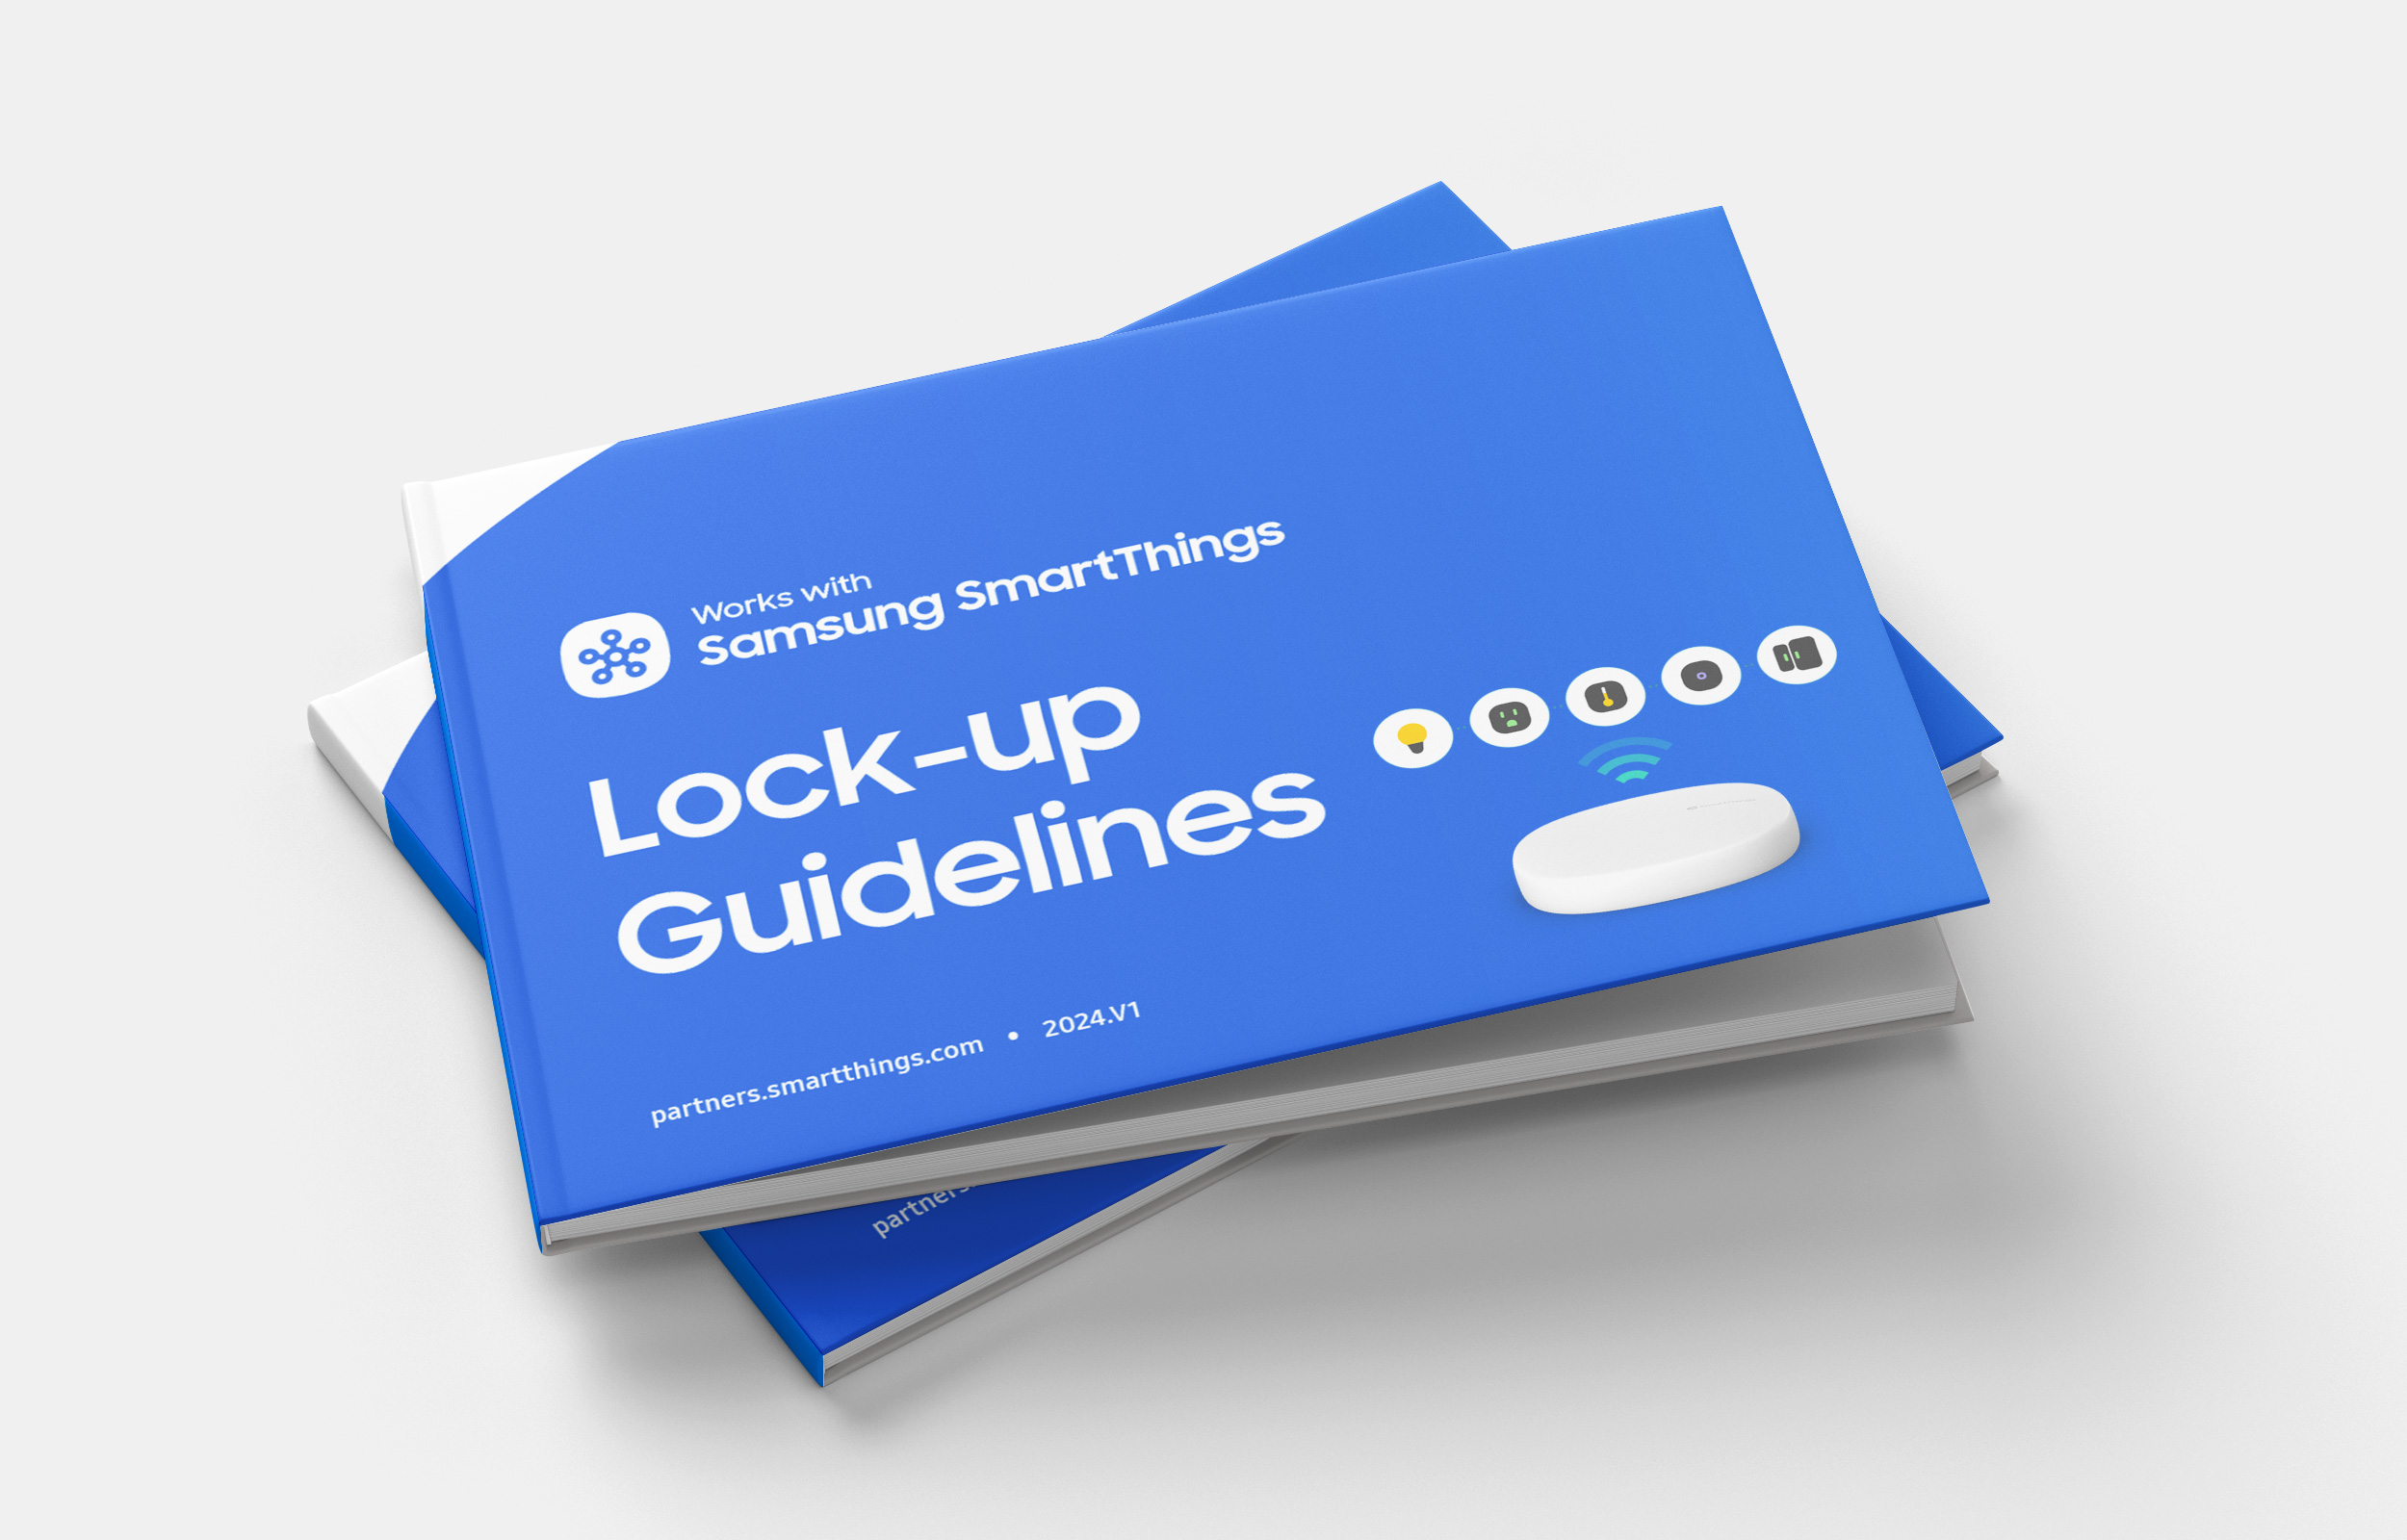 Works with SmartThings Lock&#8209;up Guidelines